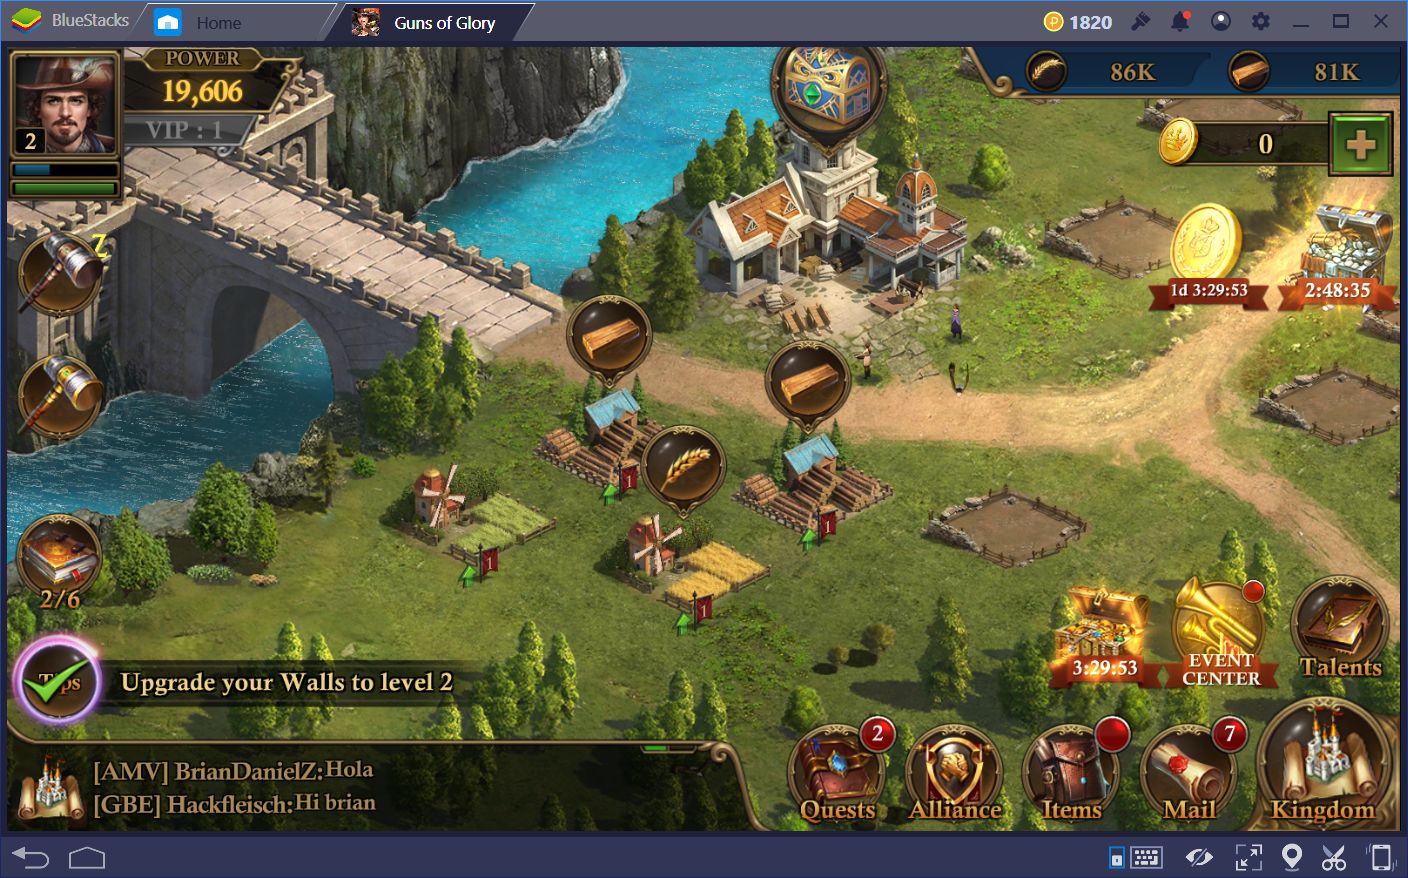 Guns of Glory on PC: Learning About The Castle and Kingdom Screens